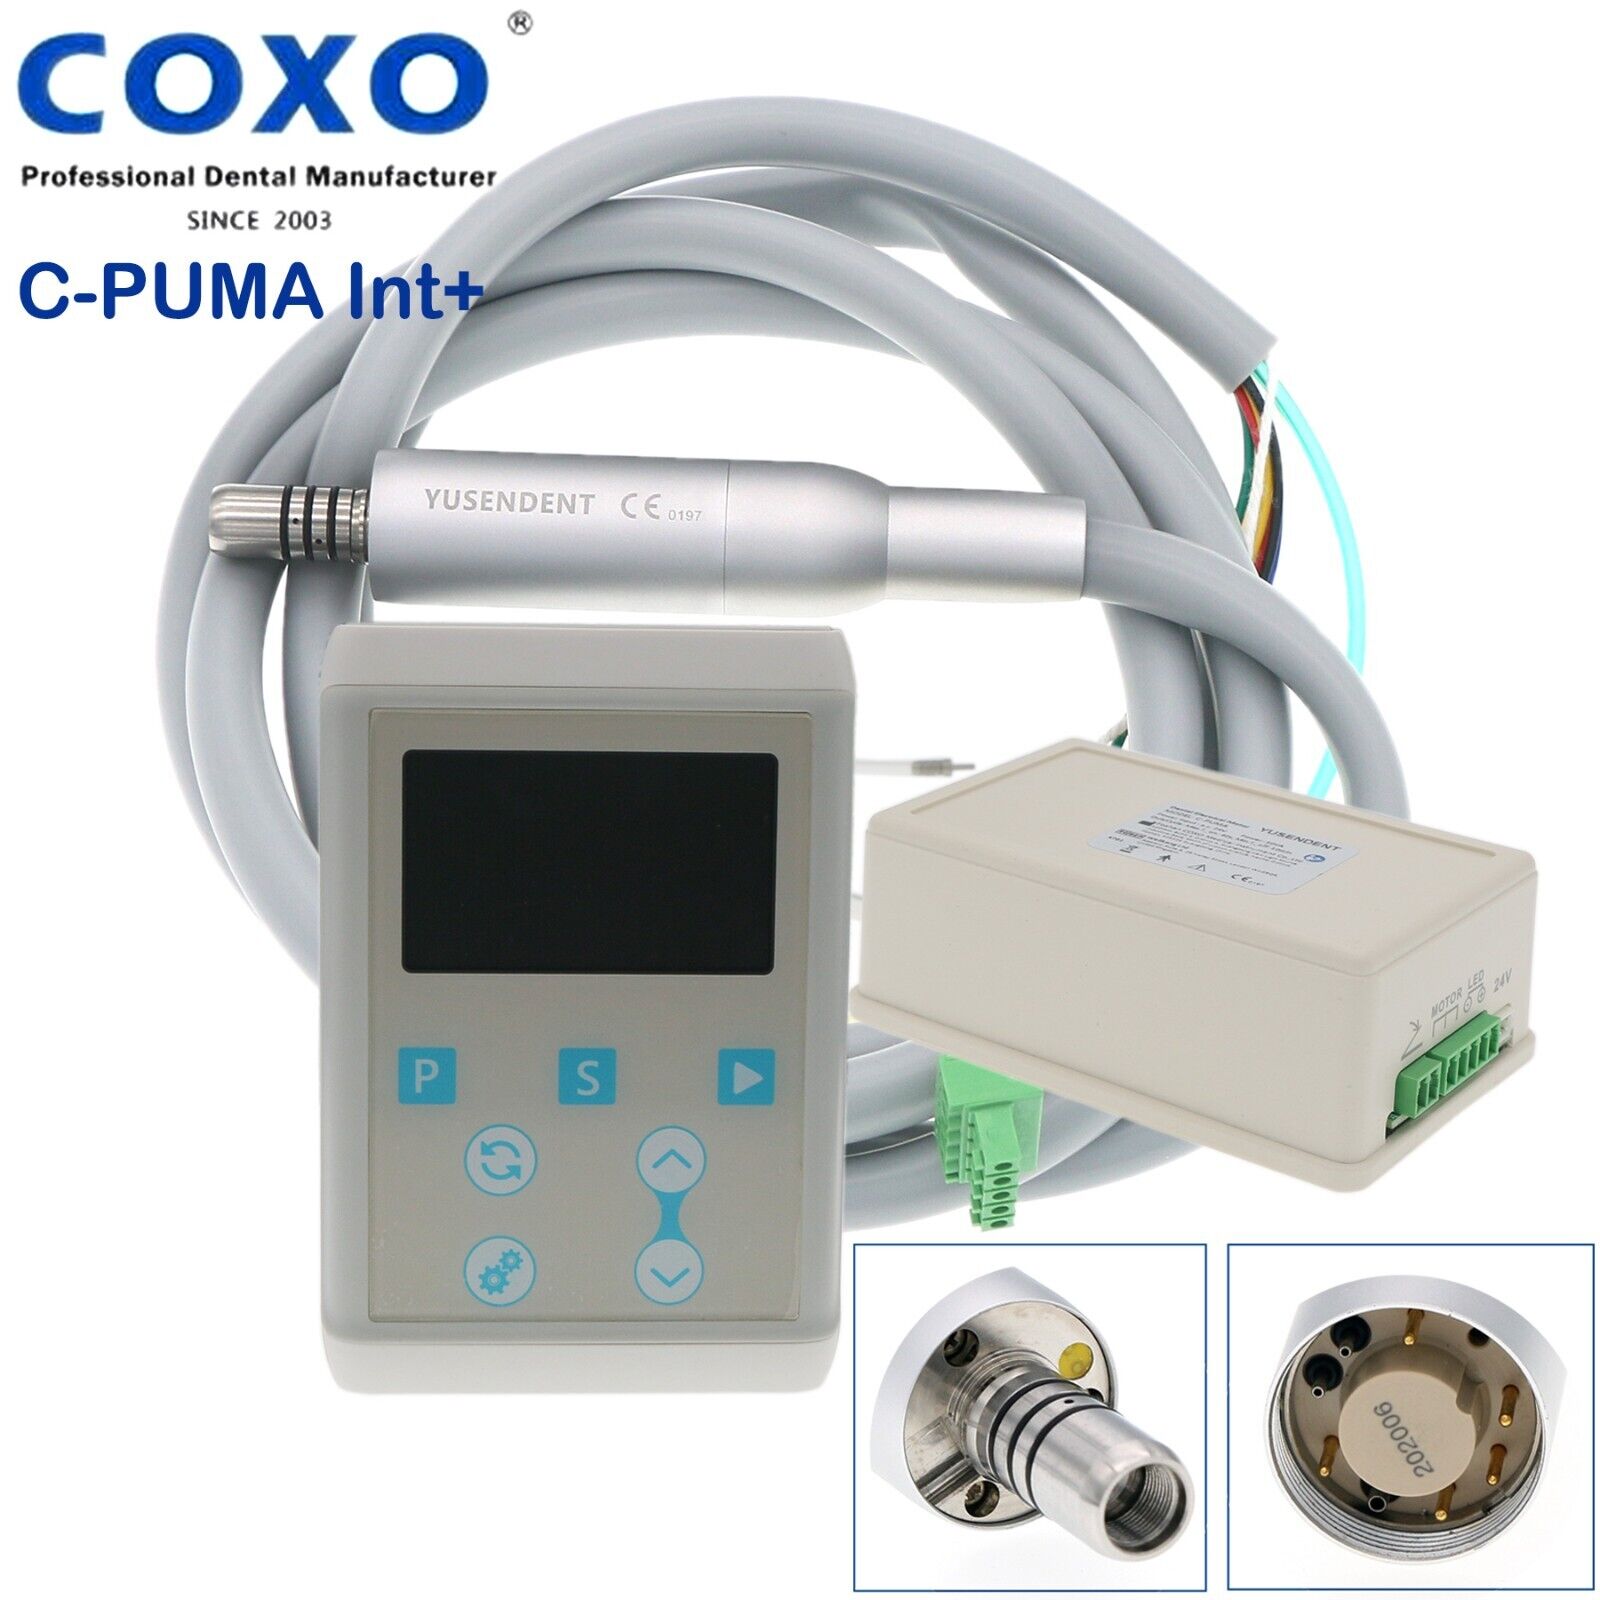 USA COXO C PUMA INT+ Dental Electric Motor Built-in LED 6:1 Handpiece High Speed